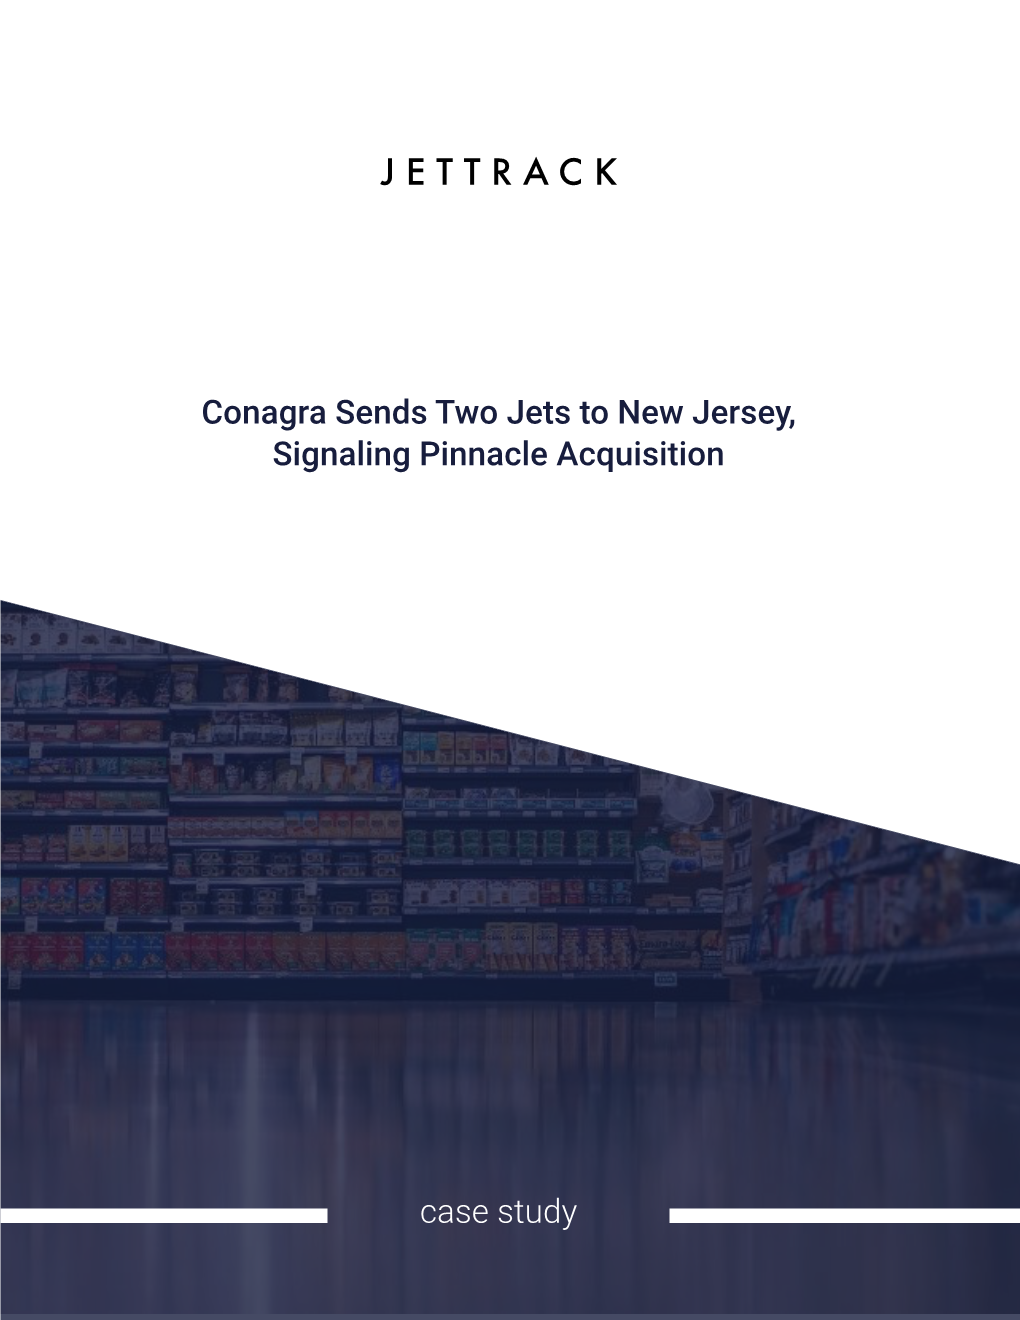 Conagra Sends Two Jets to New Jersey, Signaling Pinnacle Acquisition